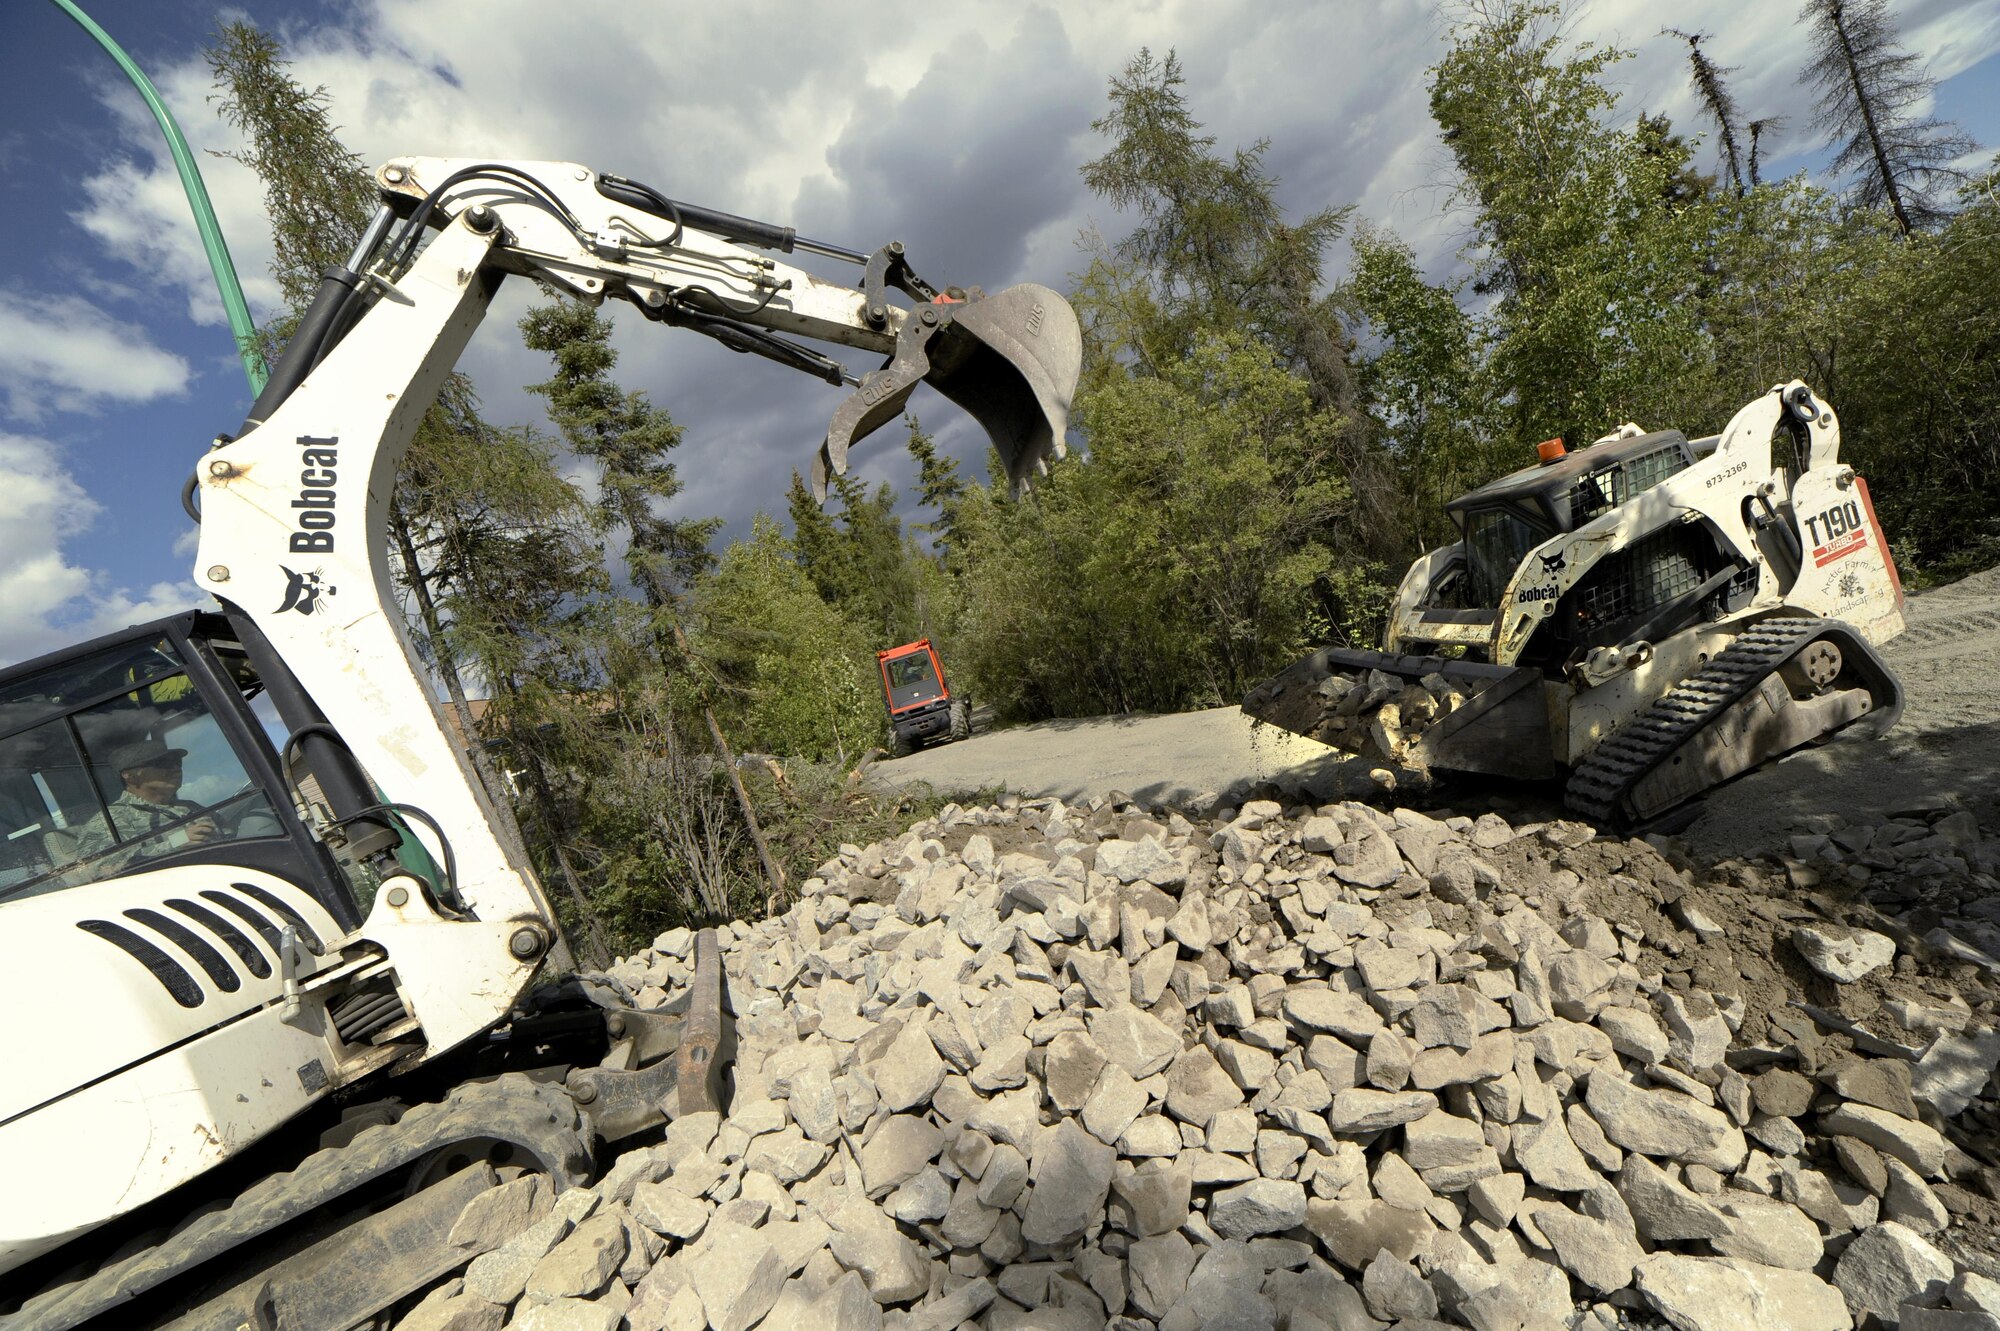 Oregon Air National Guard Chief Master Sgt. Ronald Eckert (left), 142nd Fighter Wing Civil Engineers (CES), operates a excavator to load rock and other materials used to build a new trail at Niven Lake, Yellowknife, Northern Territories, Canada, July 18, 2017. Over 30 CES members are spending two-weeks in Canada working on a variety of projects during their Deployment for Training (DFT). (U.S. Air National Guard photo/Master Sgt. John Hughel, 142nd Fighter Wing Public Affairs)